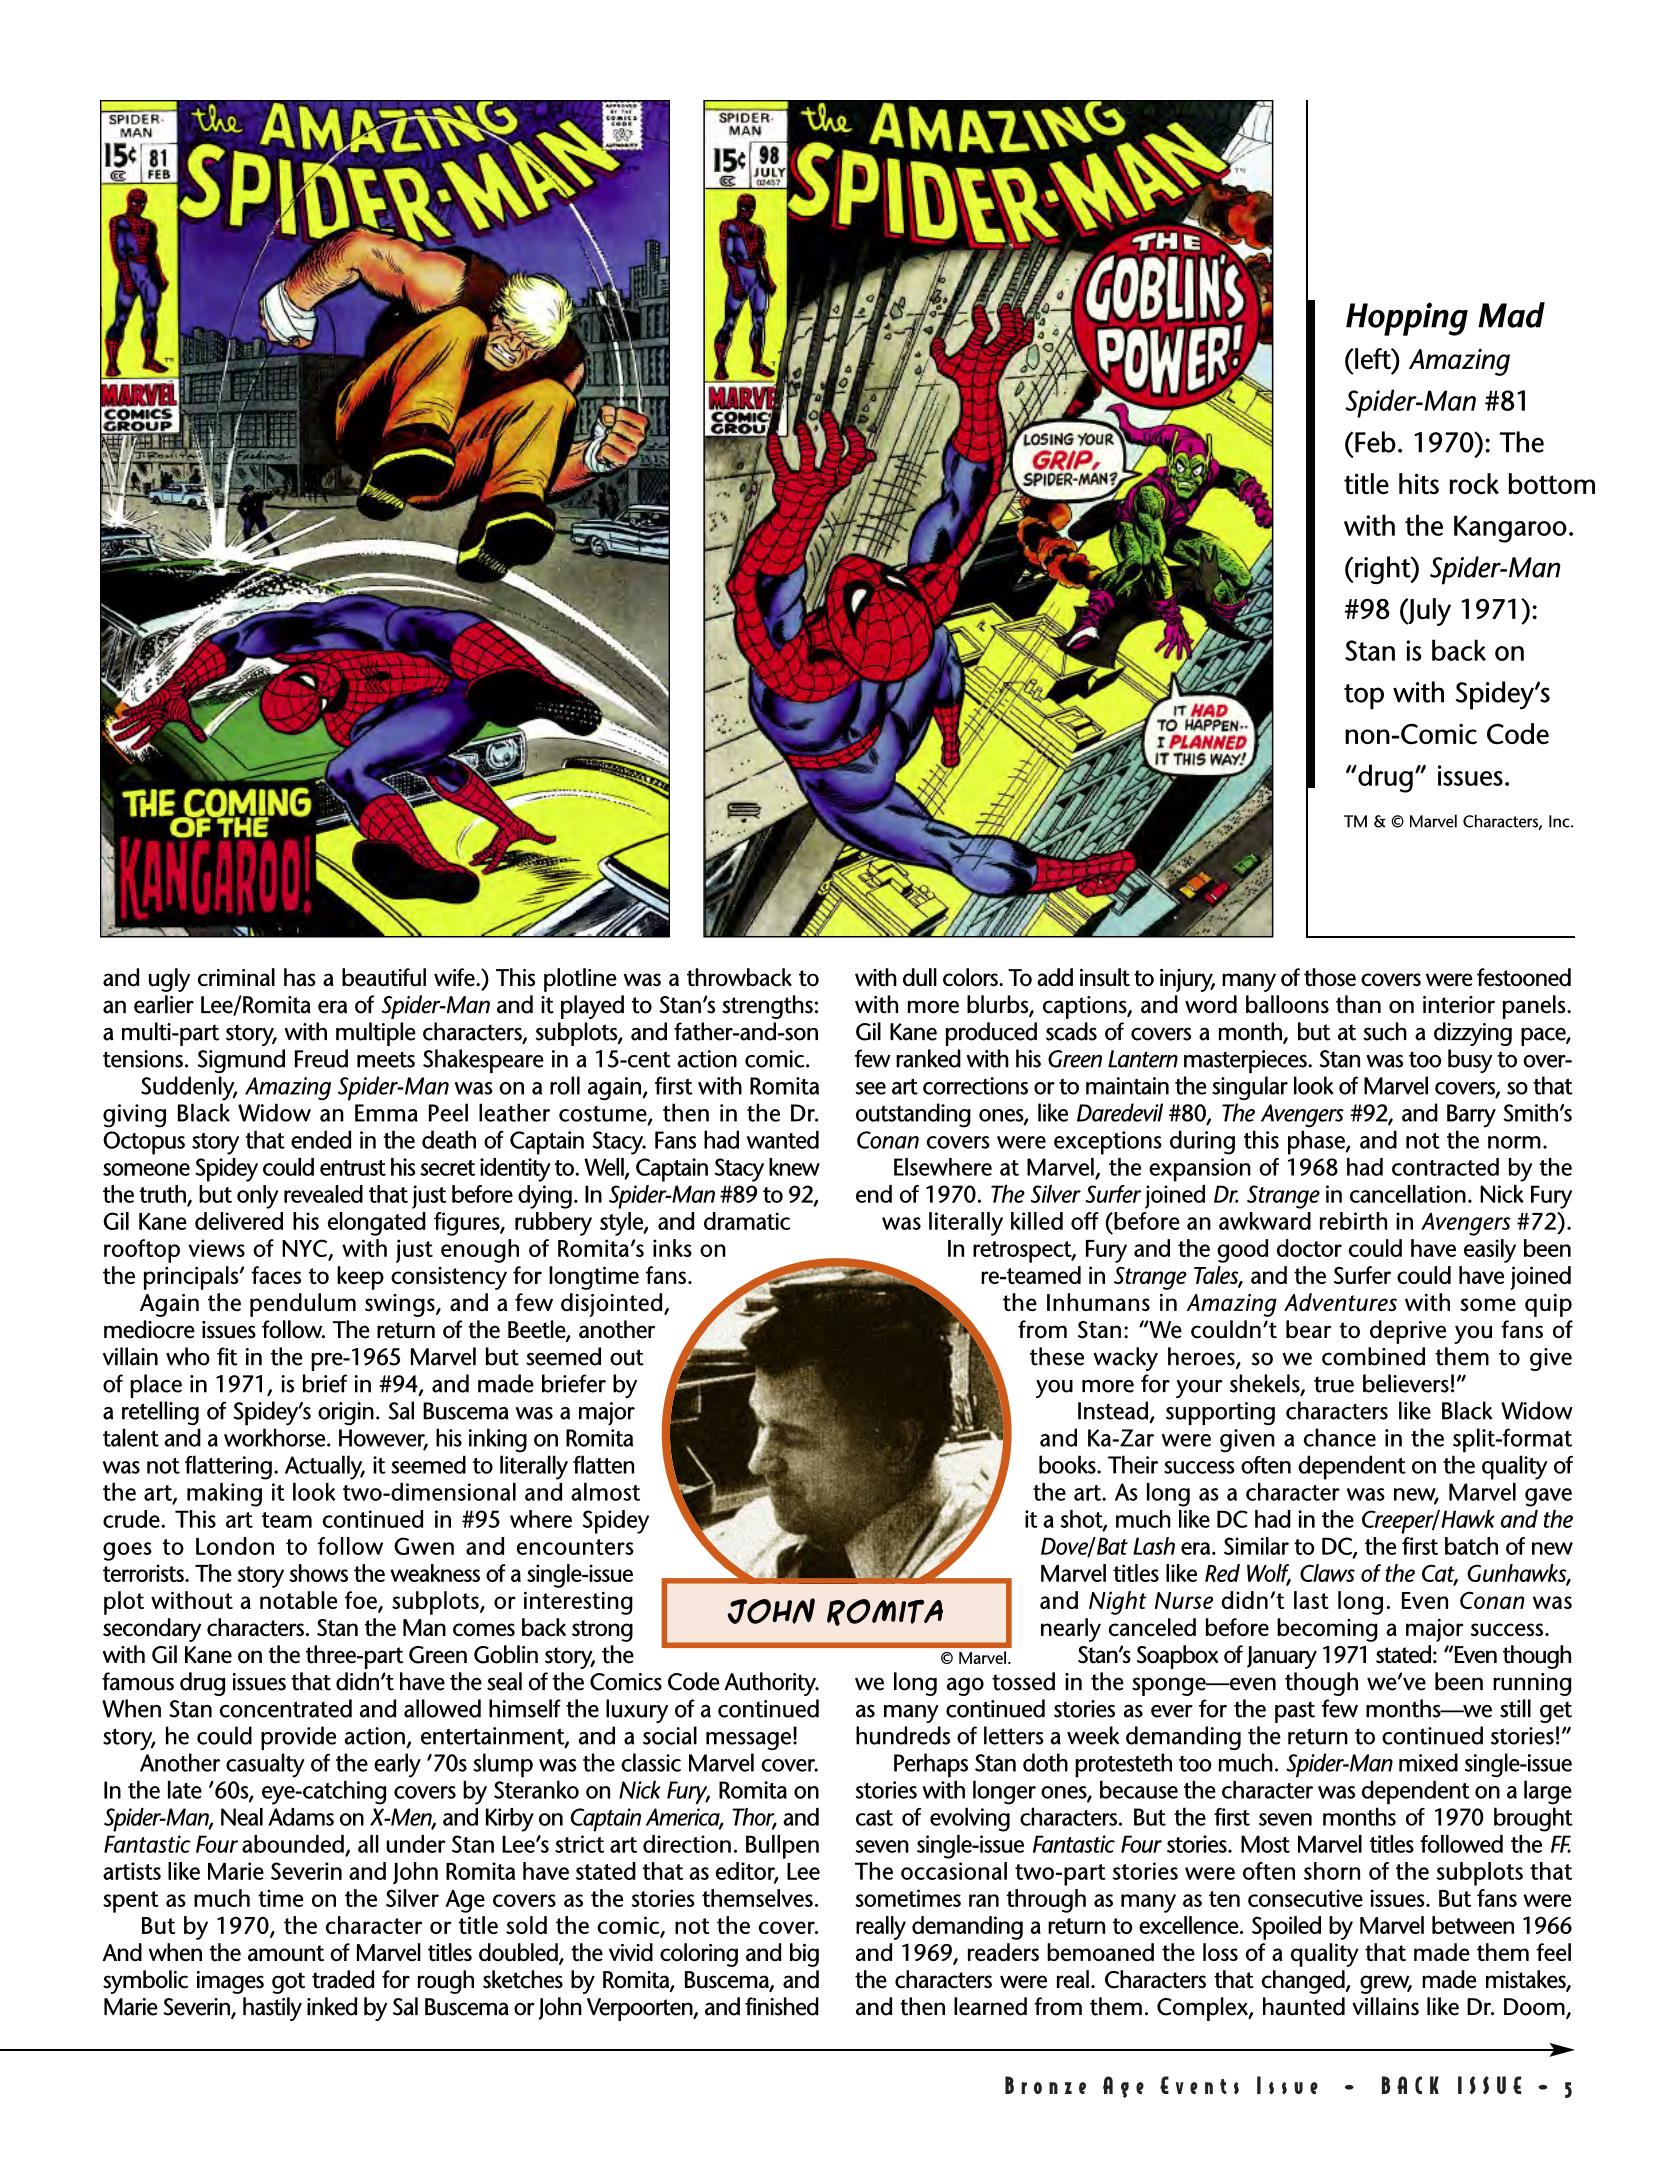 Read online Back Issue comic -  Issue #82 - 7